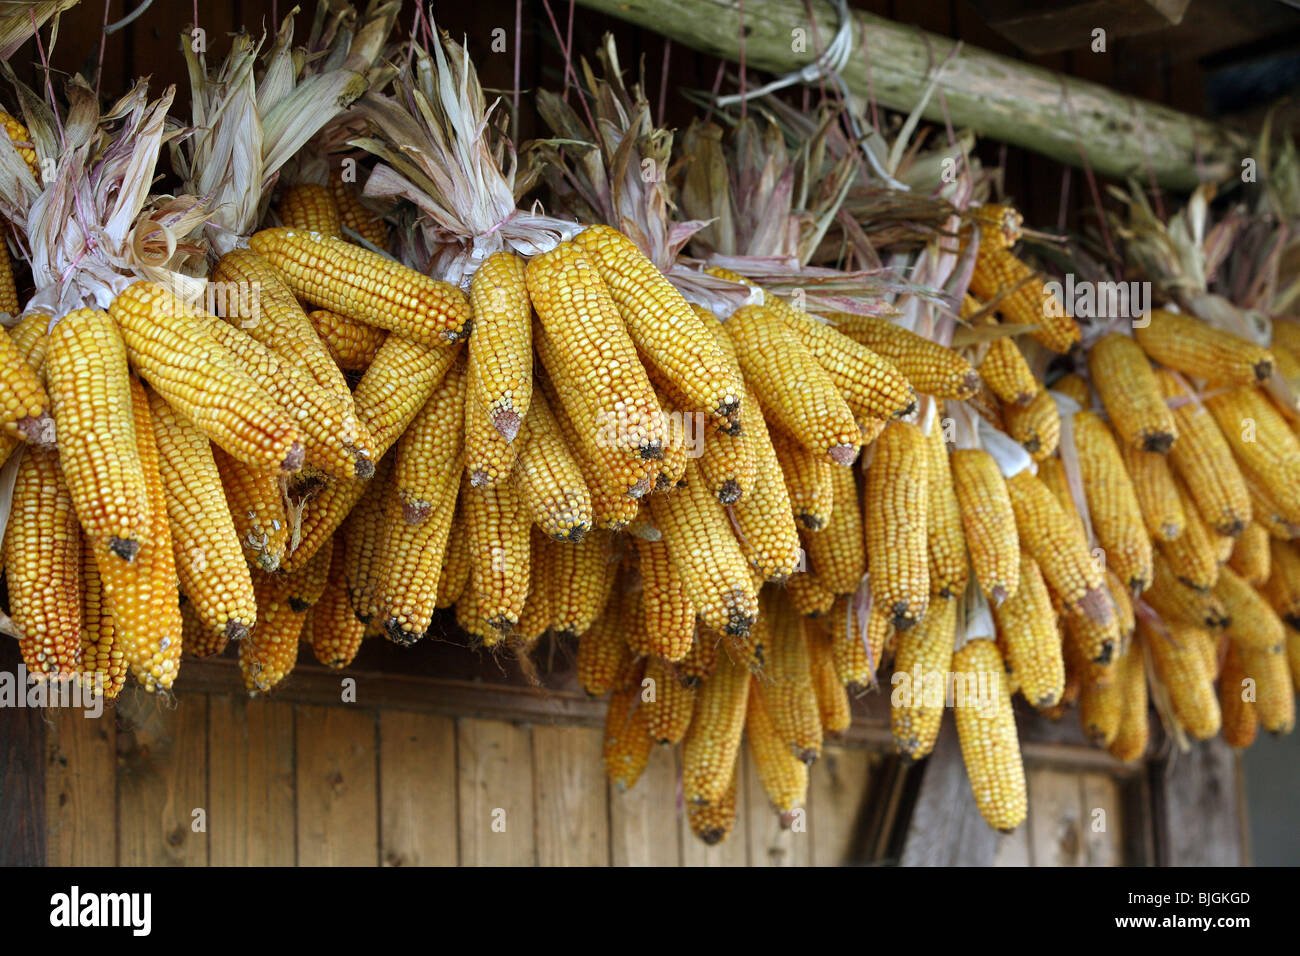 Corncobs are hanging out to dry, Prangendorf, Germany Stock Photo